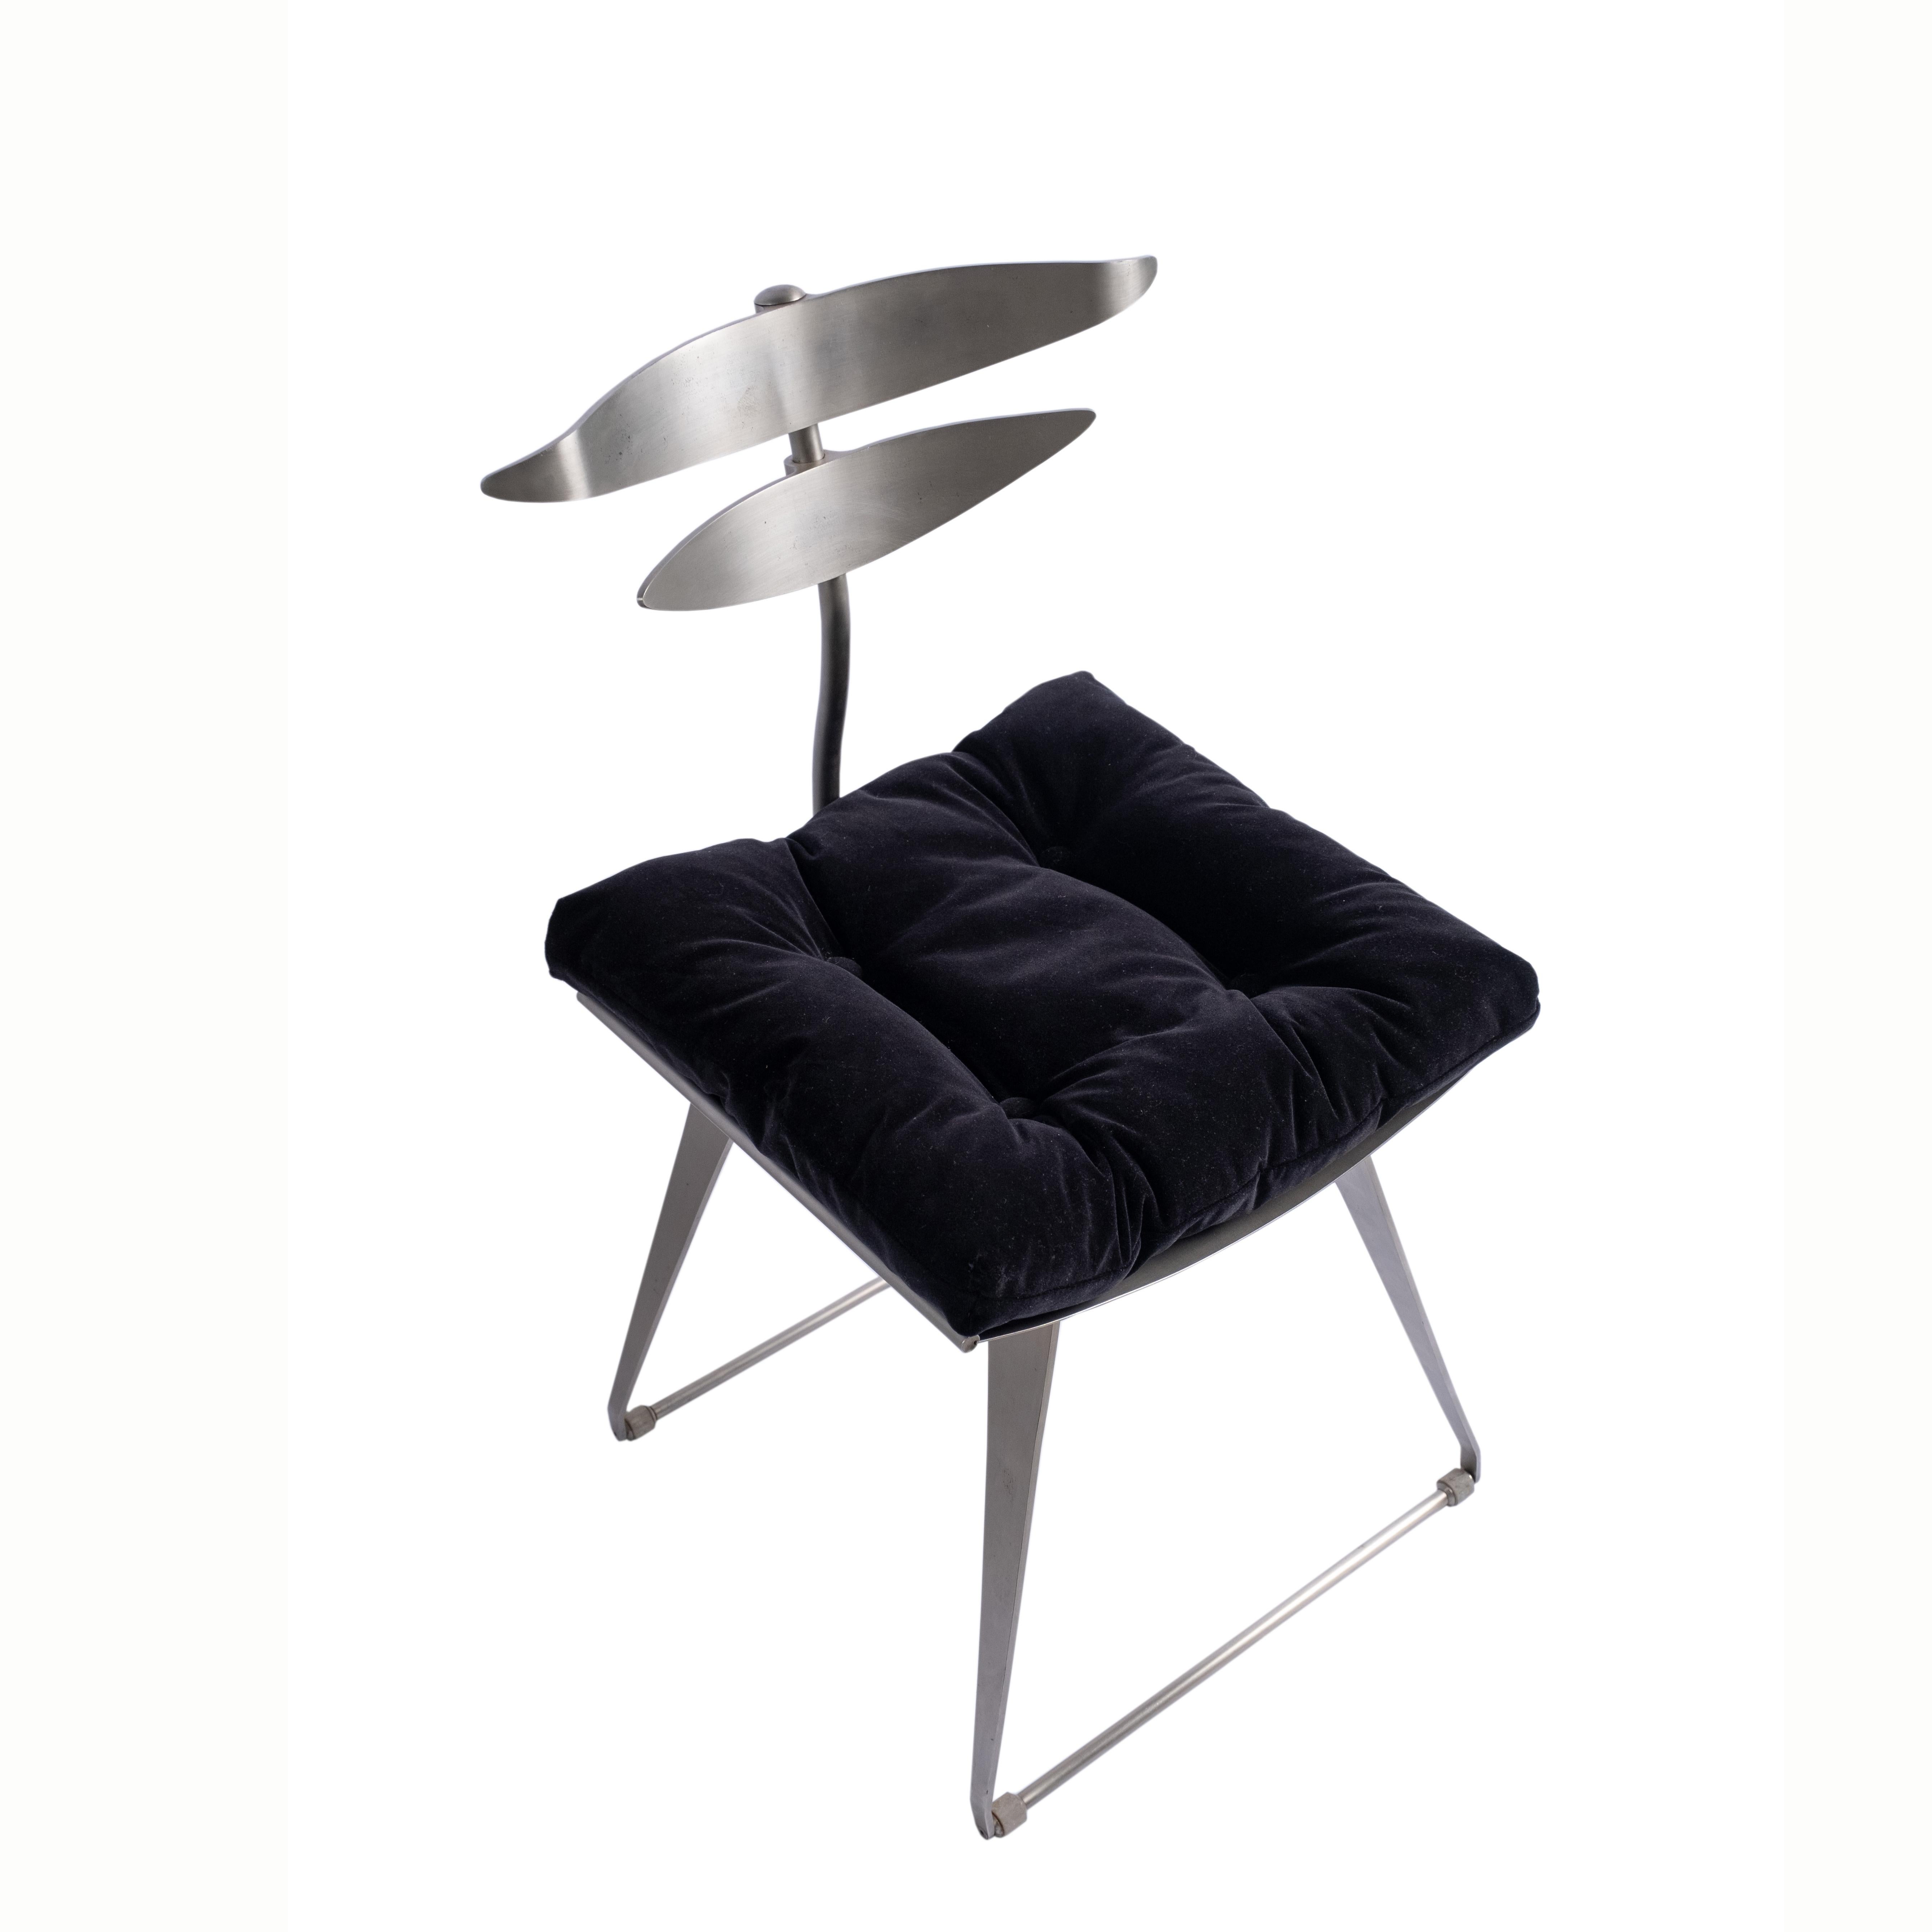 Let yourself be enchanted by this magnificent collection piece that is part of designer Pedro Useche's iconic models.
The Eller chair was designed by designer Pedro Useche and presented in 1991 at the Design Brasil Exhibition.
This piece is an